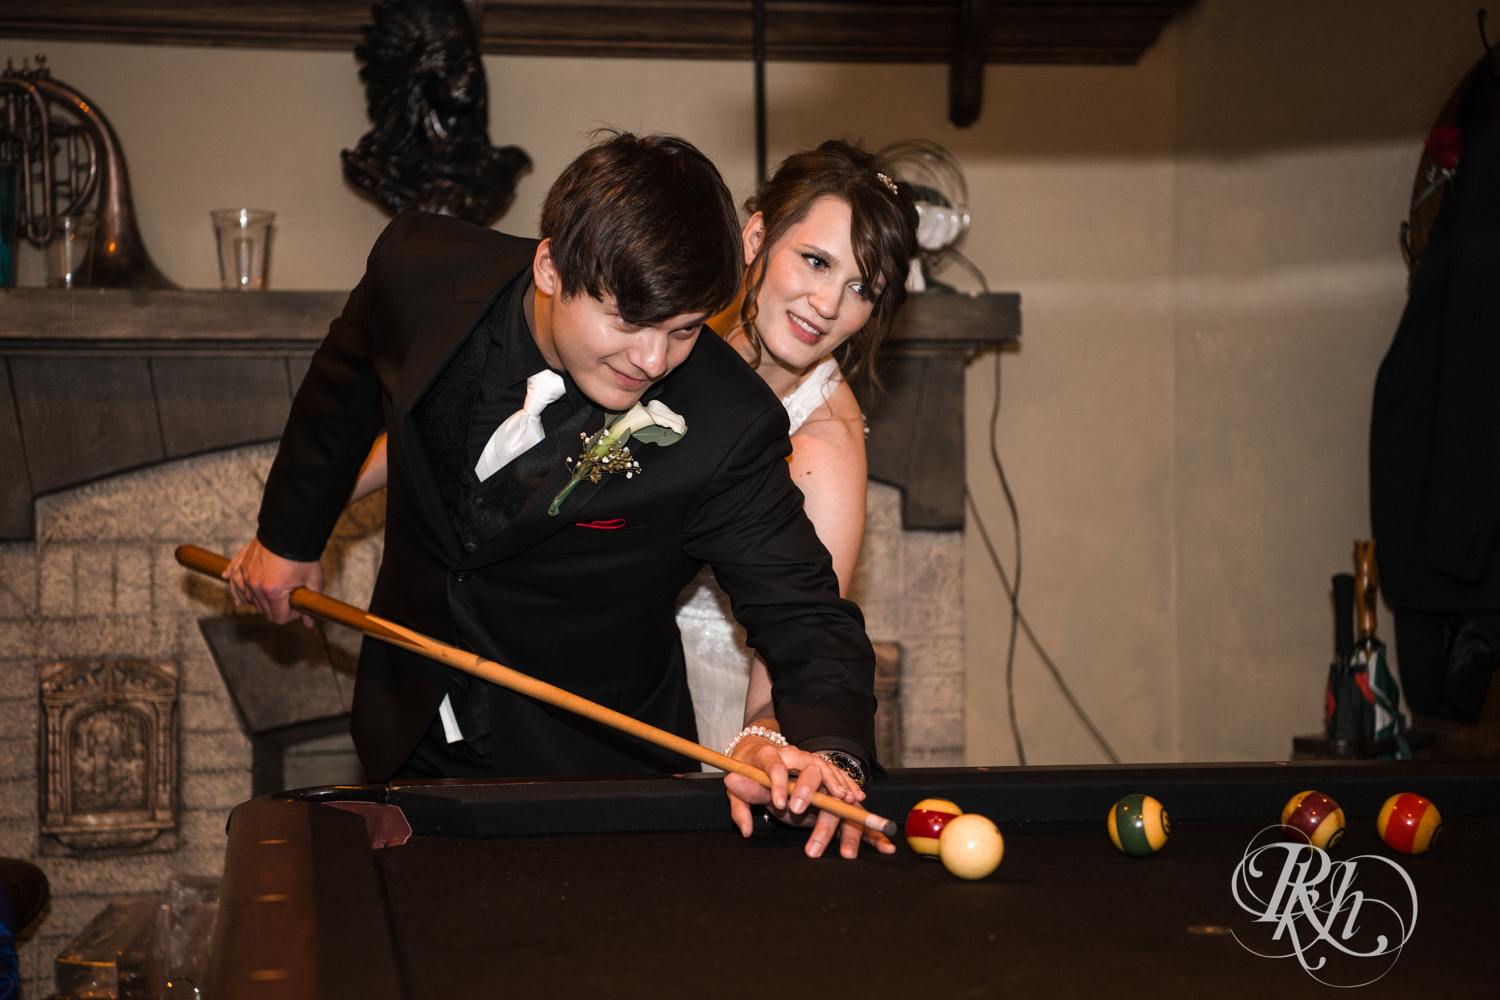 Bride and groom play pool at Kellerman's Event Center in White Bear Lake, Minnesota.